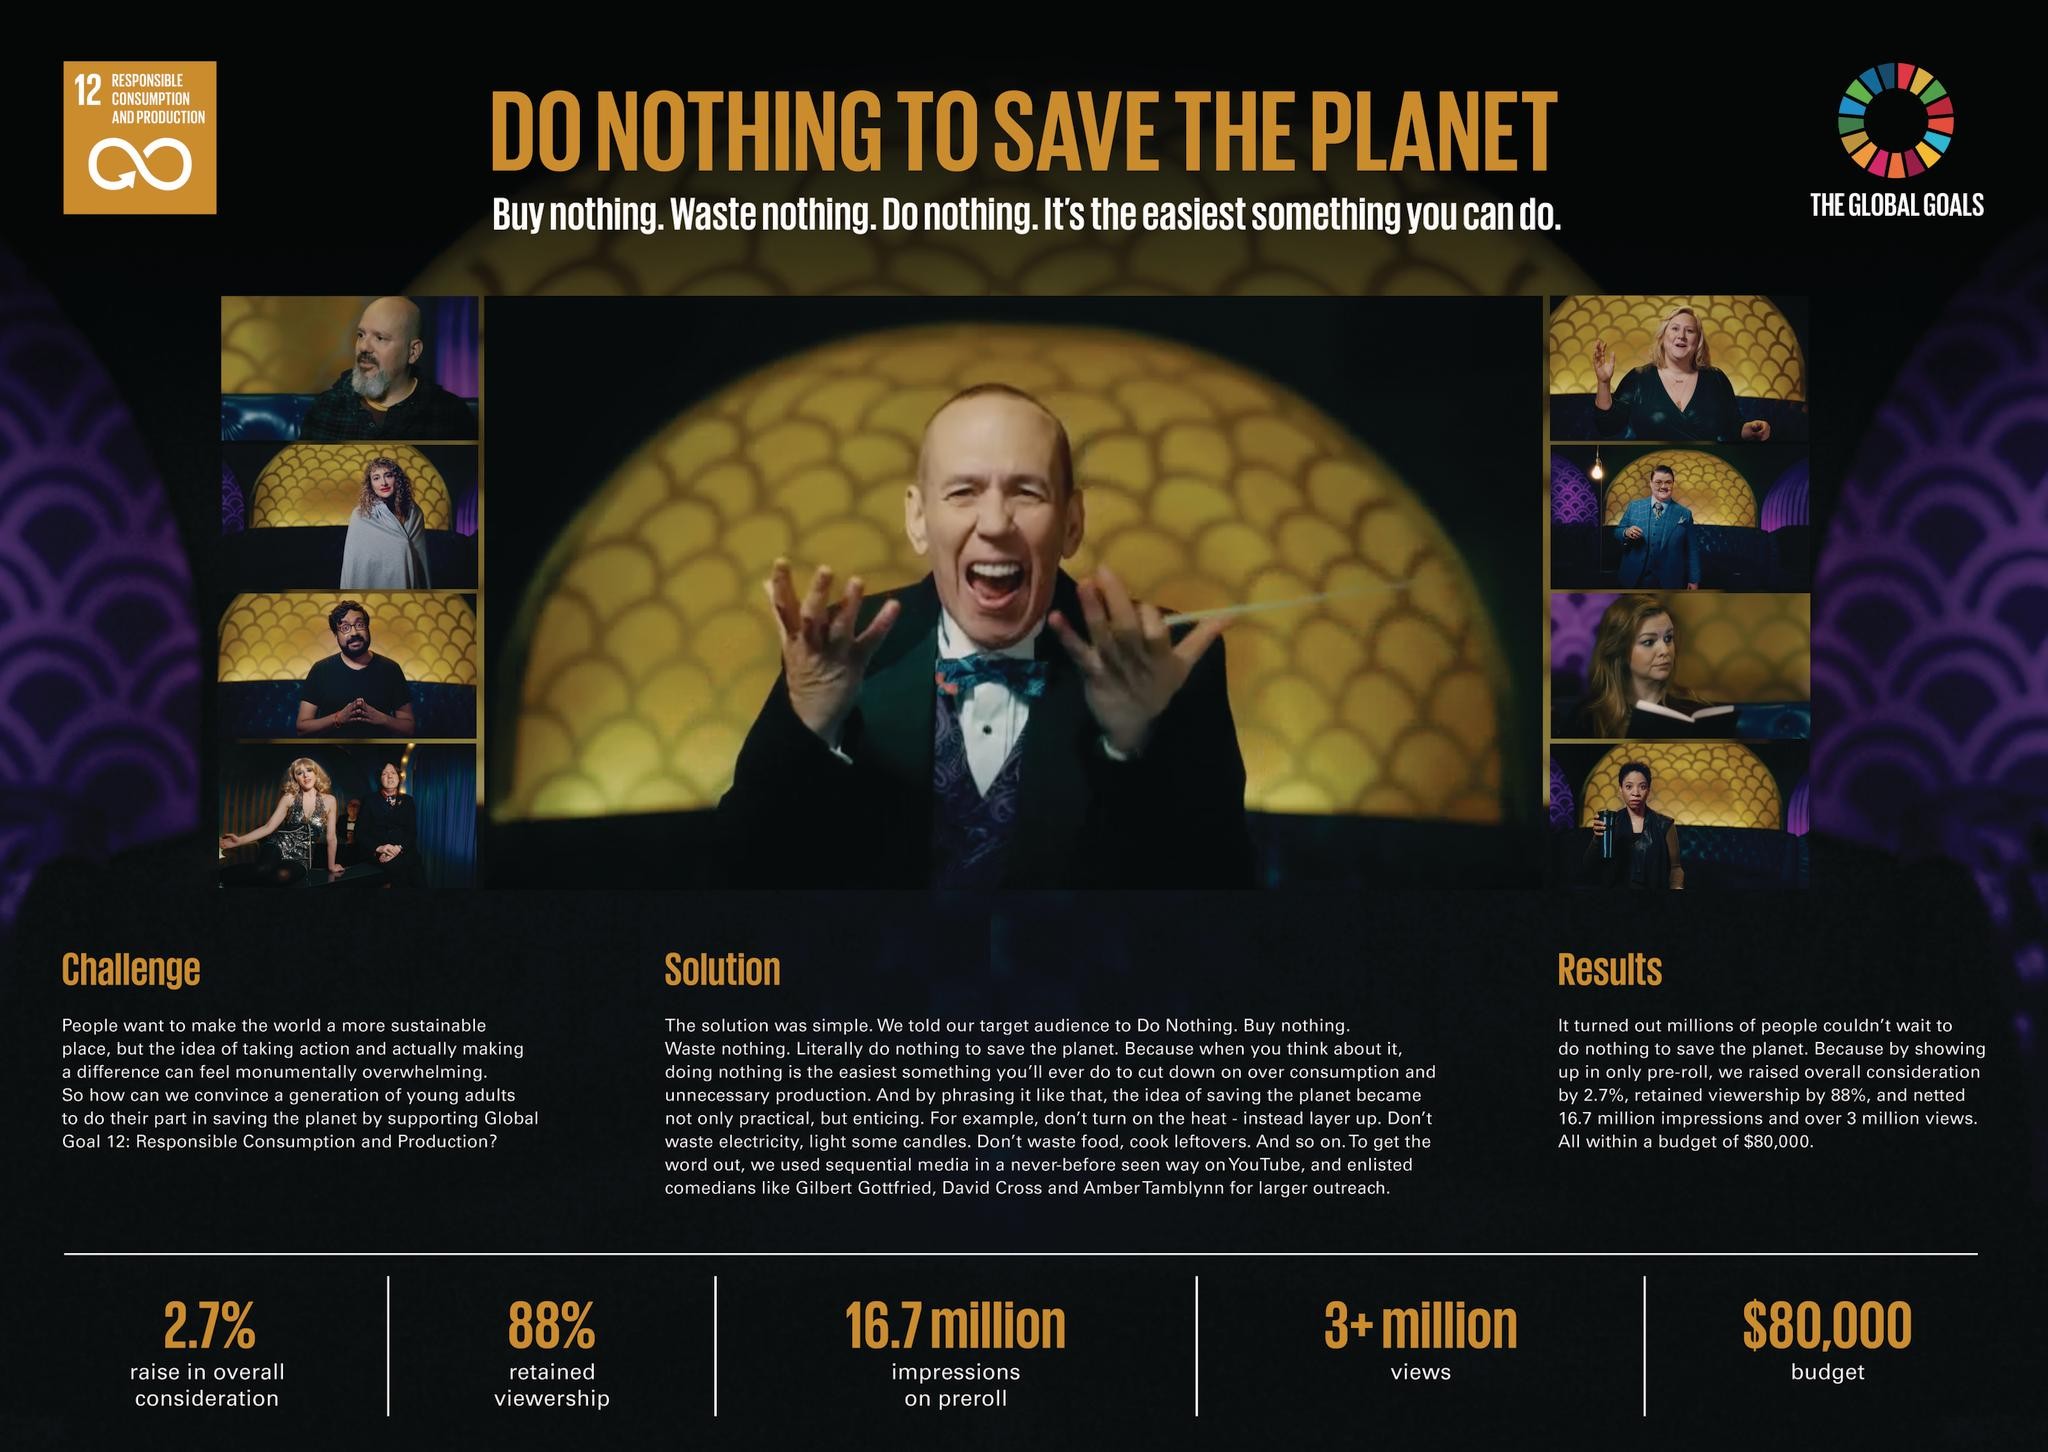 Global Goal 12: Do Nothing to Save the Planet